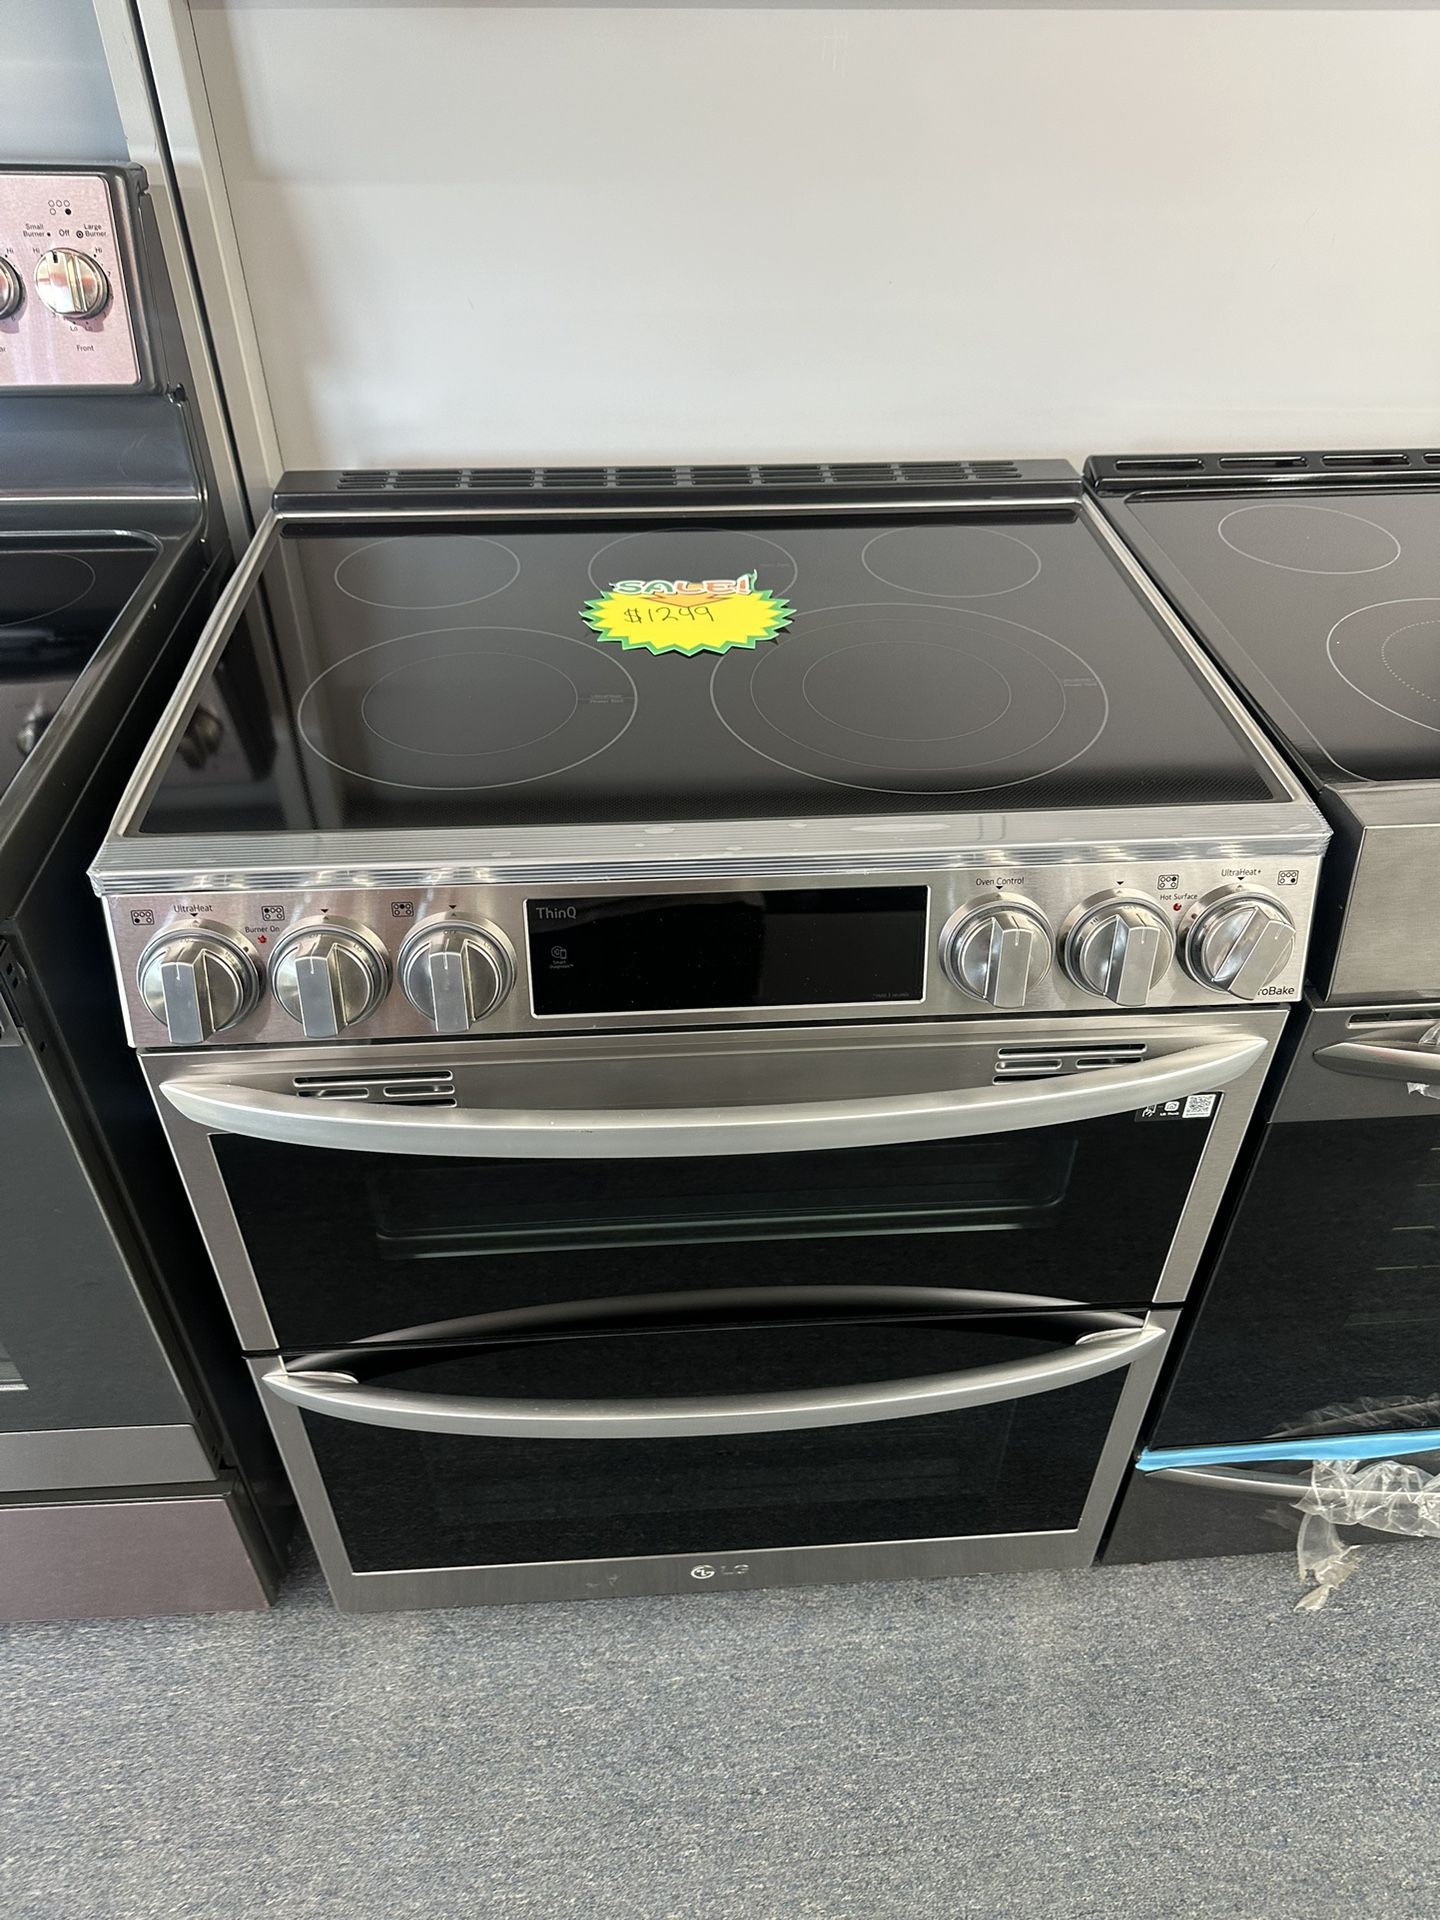 New Scratch And Dent Lg Double Oven Range One Year Warranty